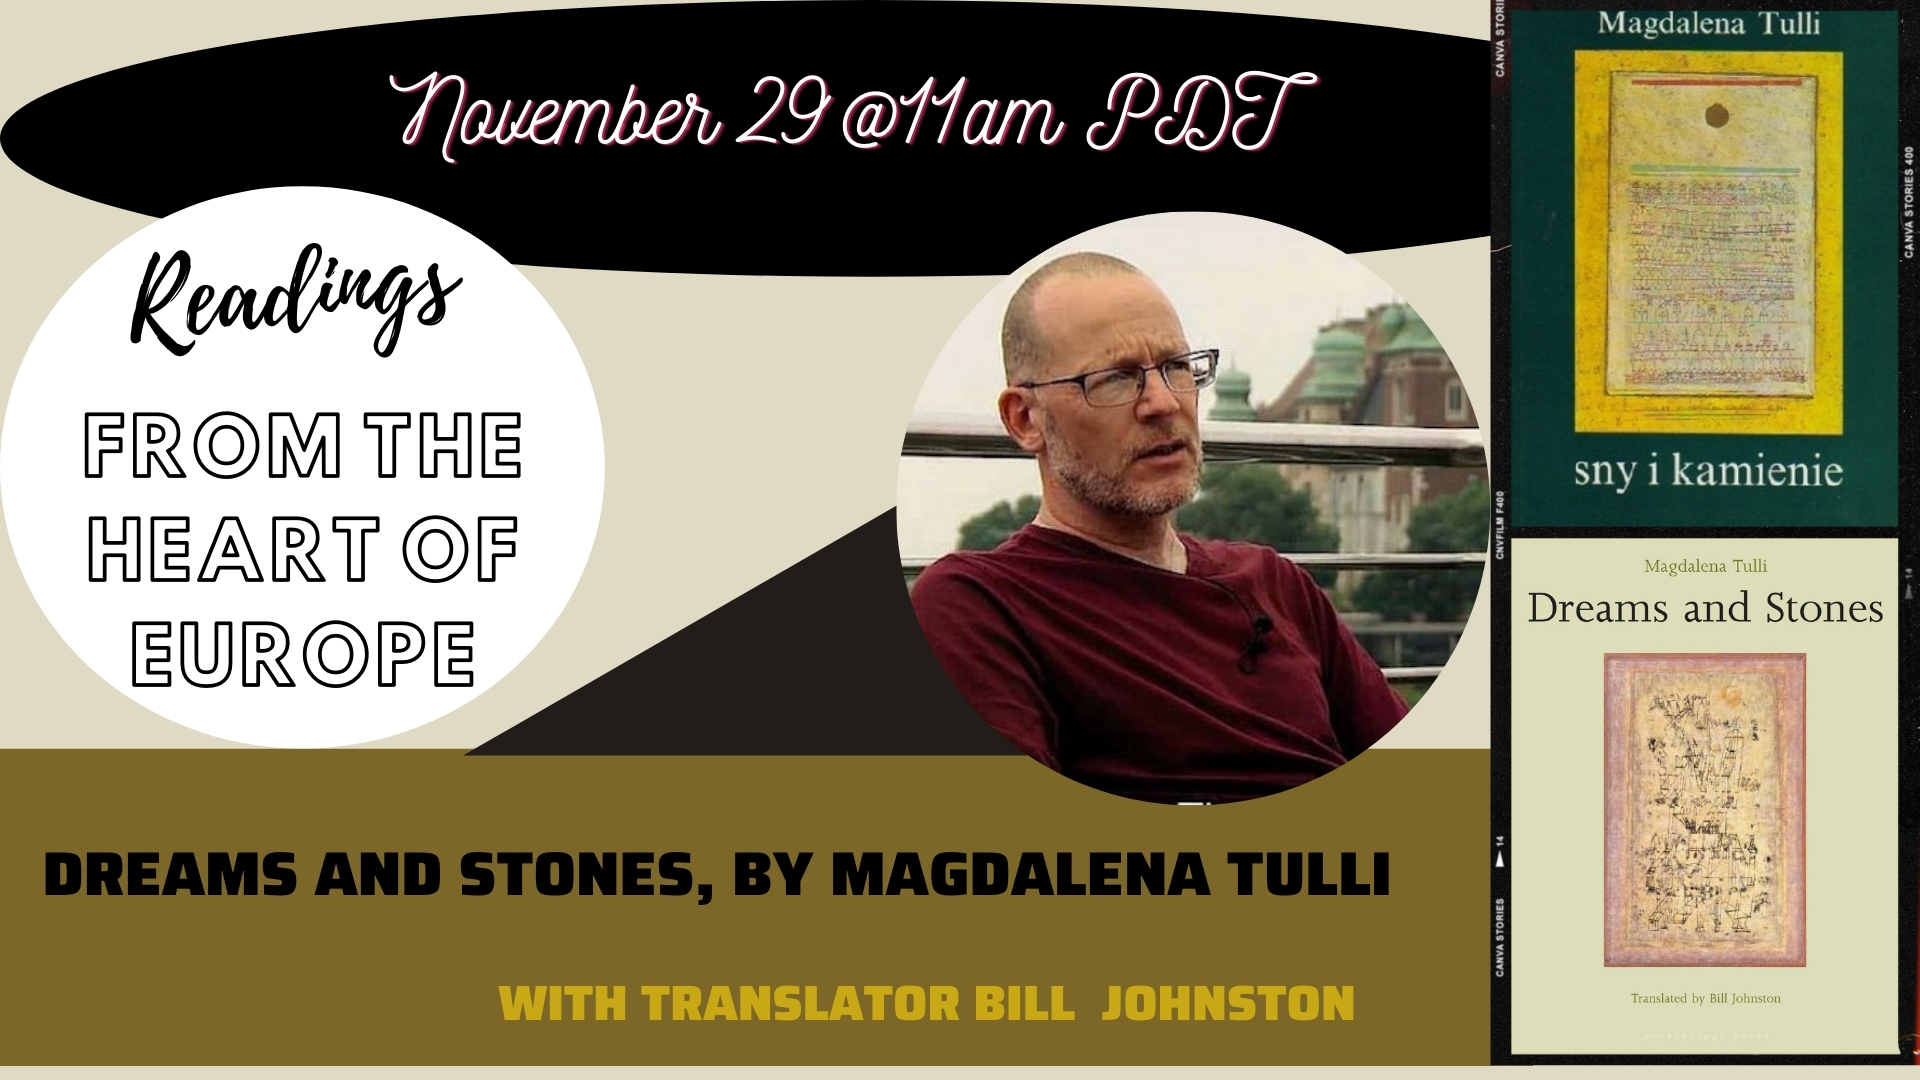 Dreams and Stones, by Magdalena Tulli with translator Bill Johnston